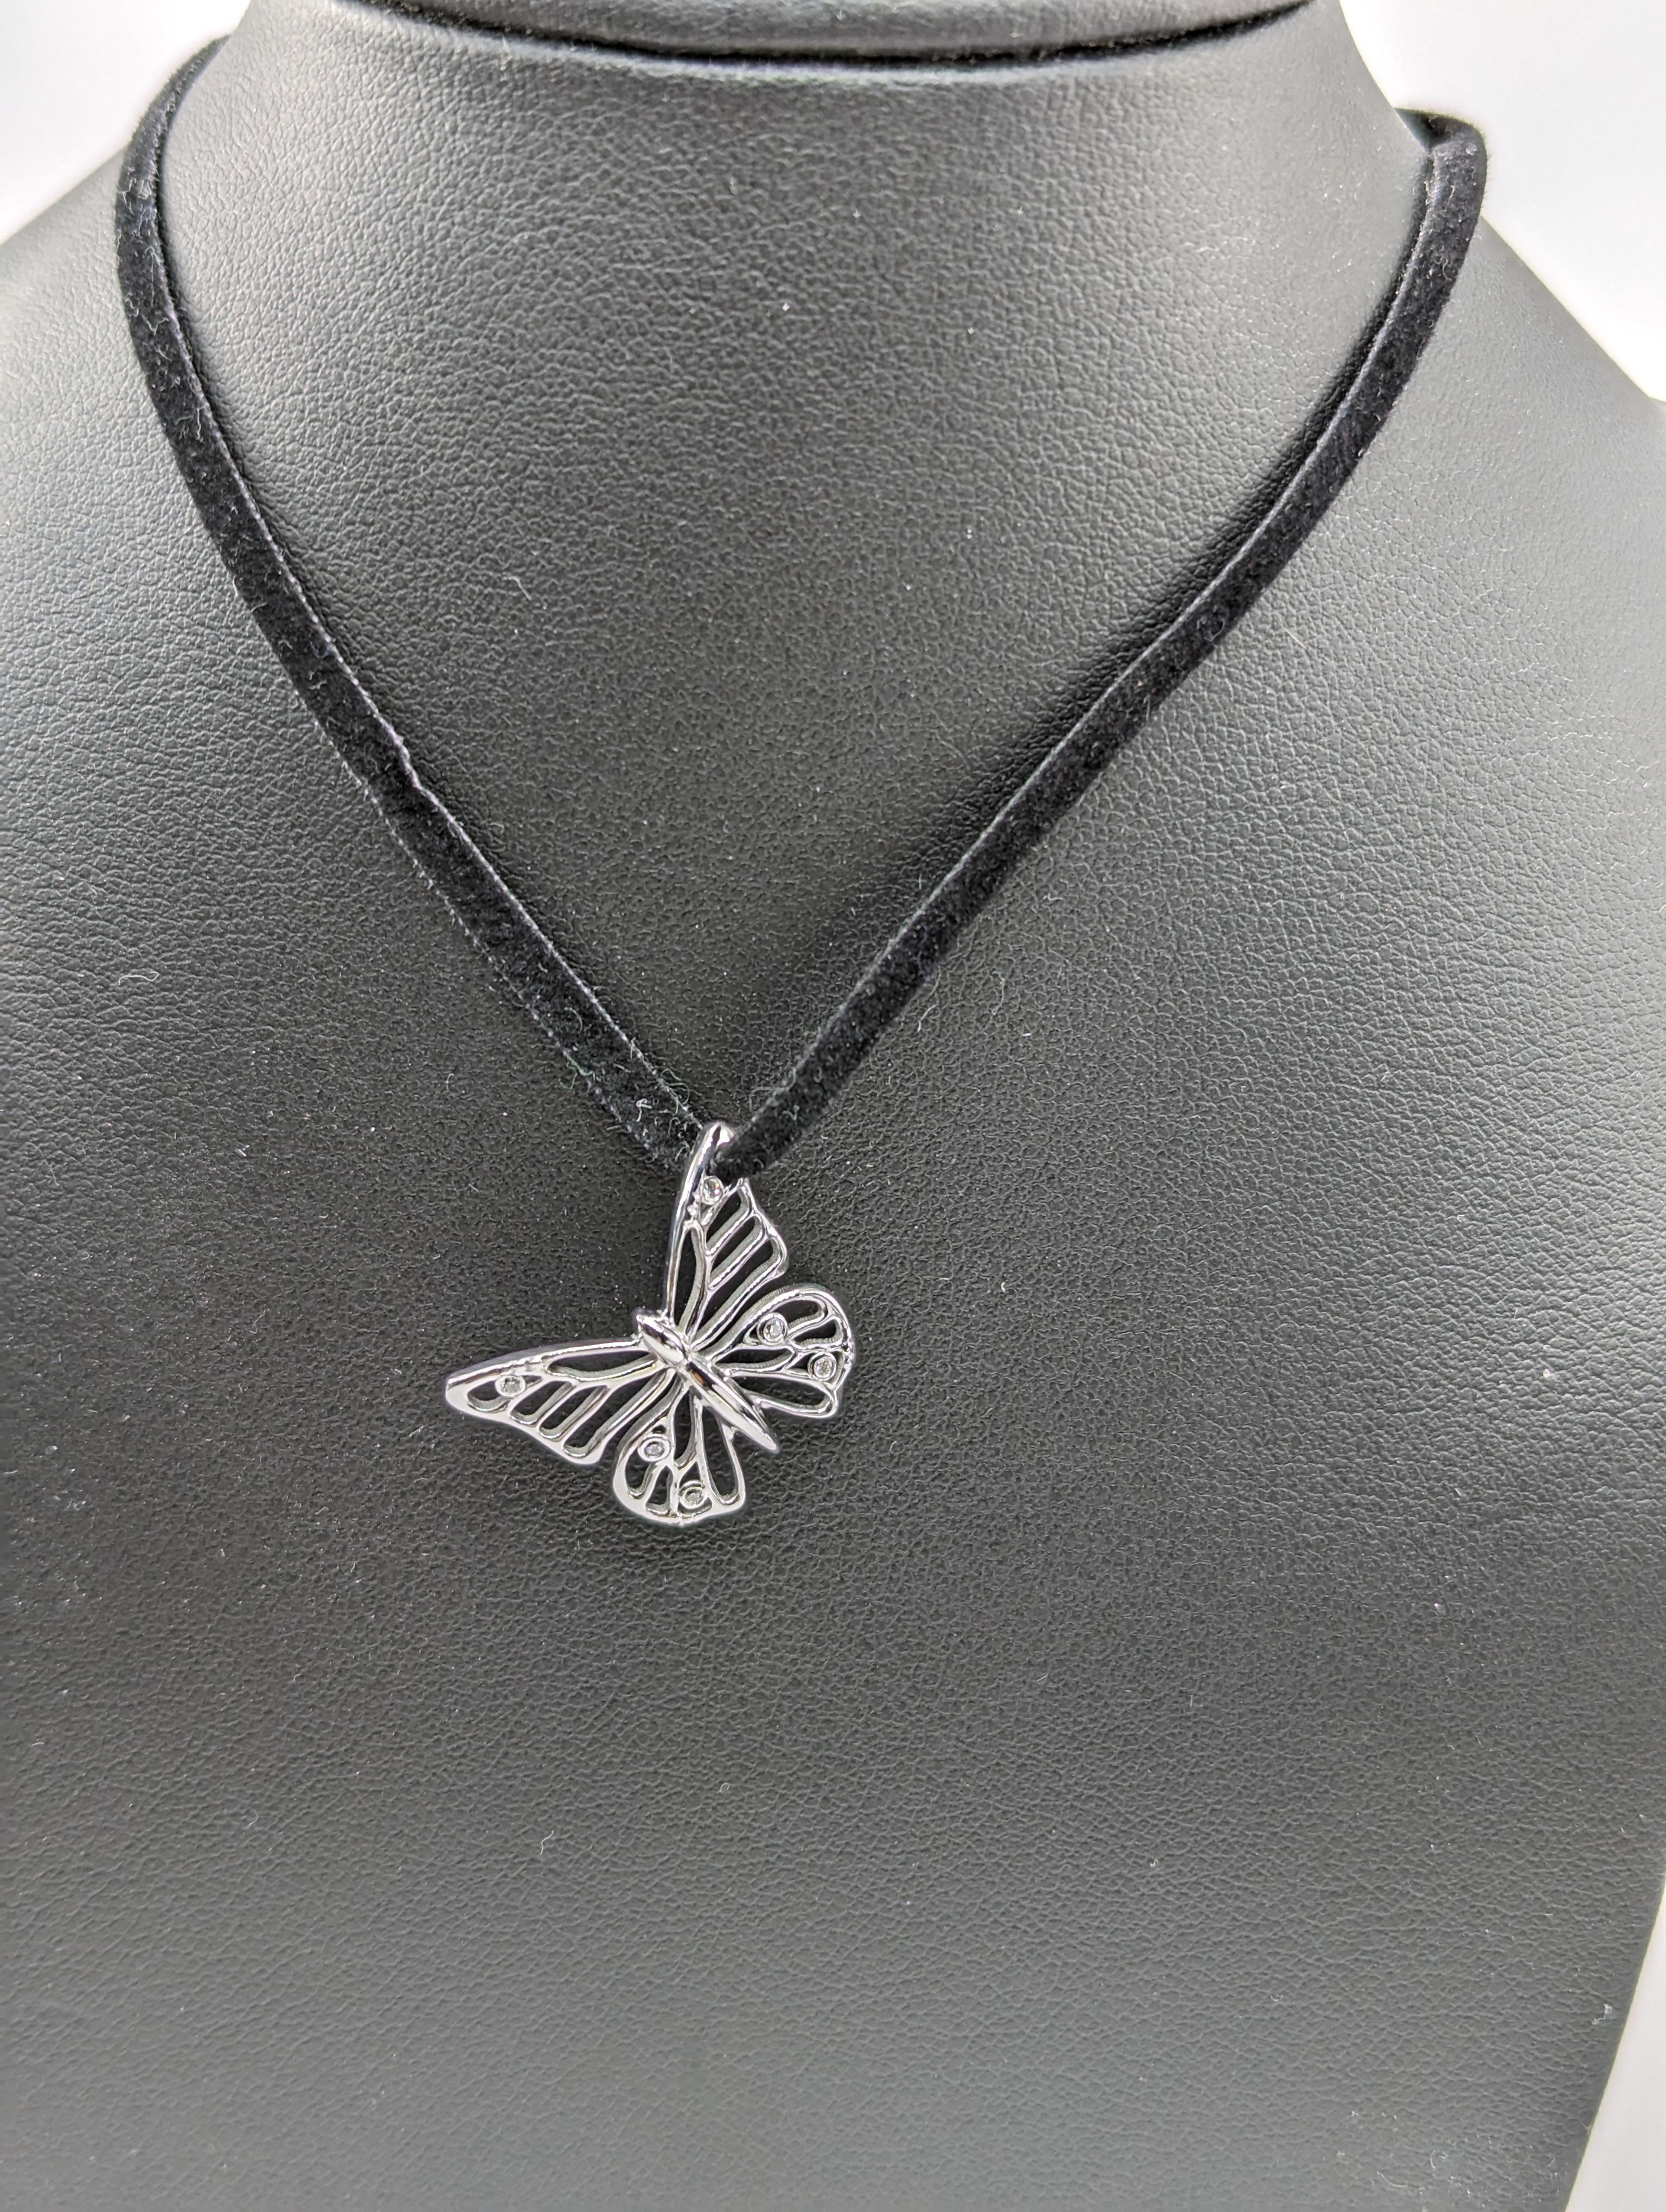 14 Karat White Gold Monarch Butterfly and GIA Diamonds Pendant Necklace For Sale 7